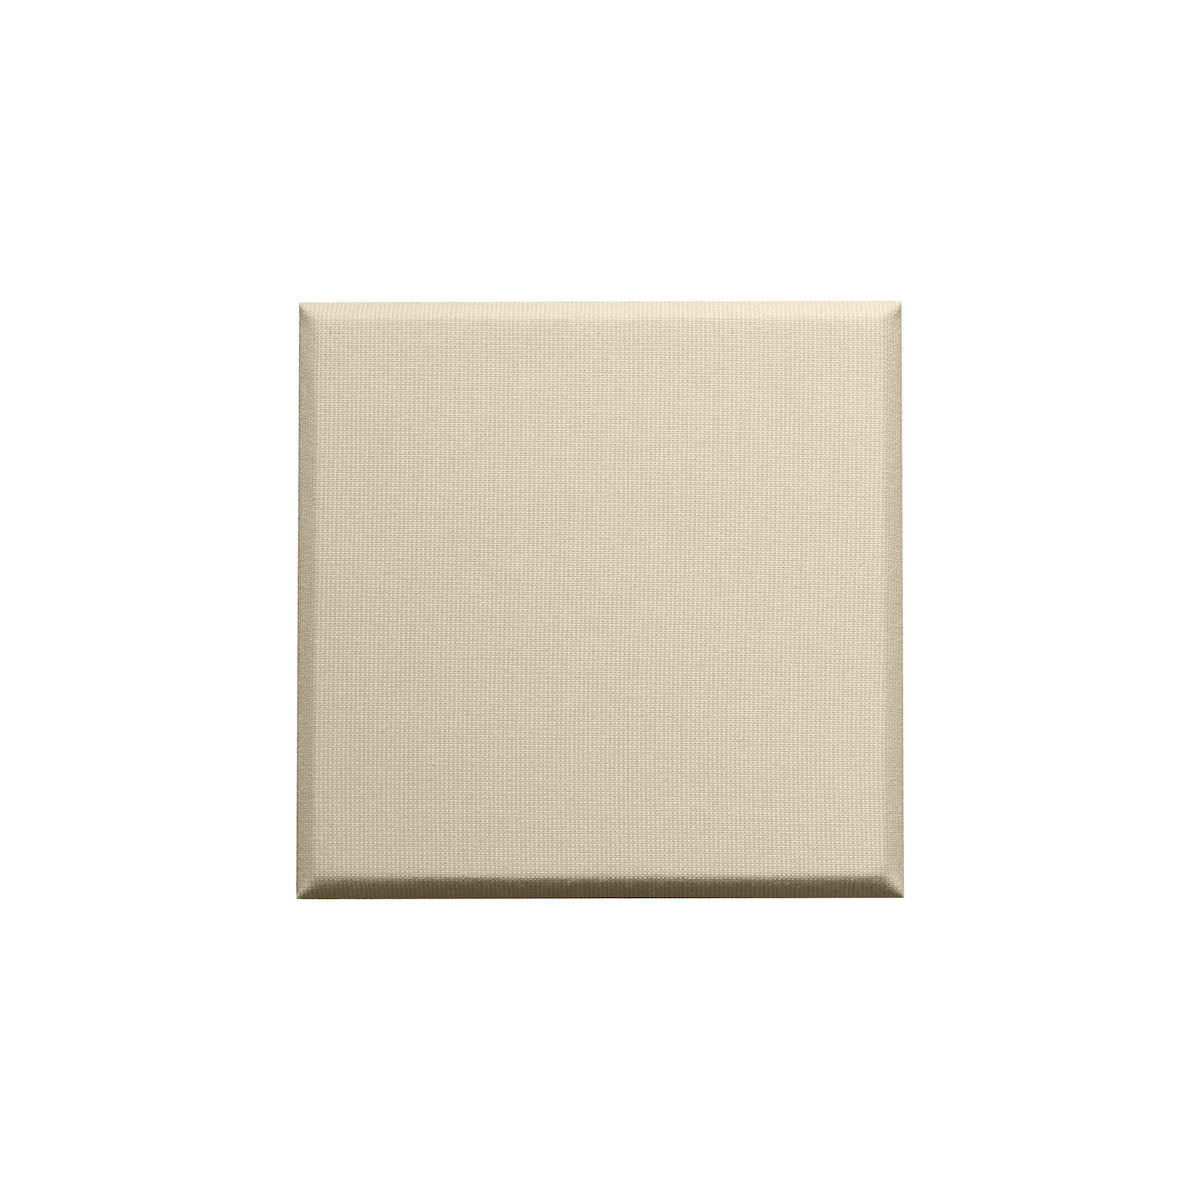 Primacoustic Broadway Wall Panels - Control Cubes, Beige